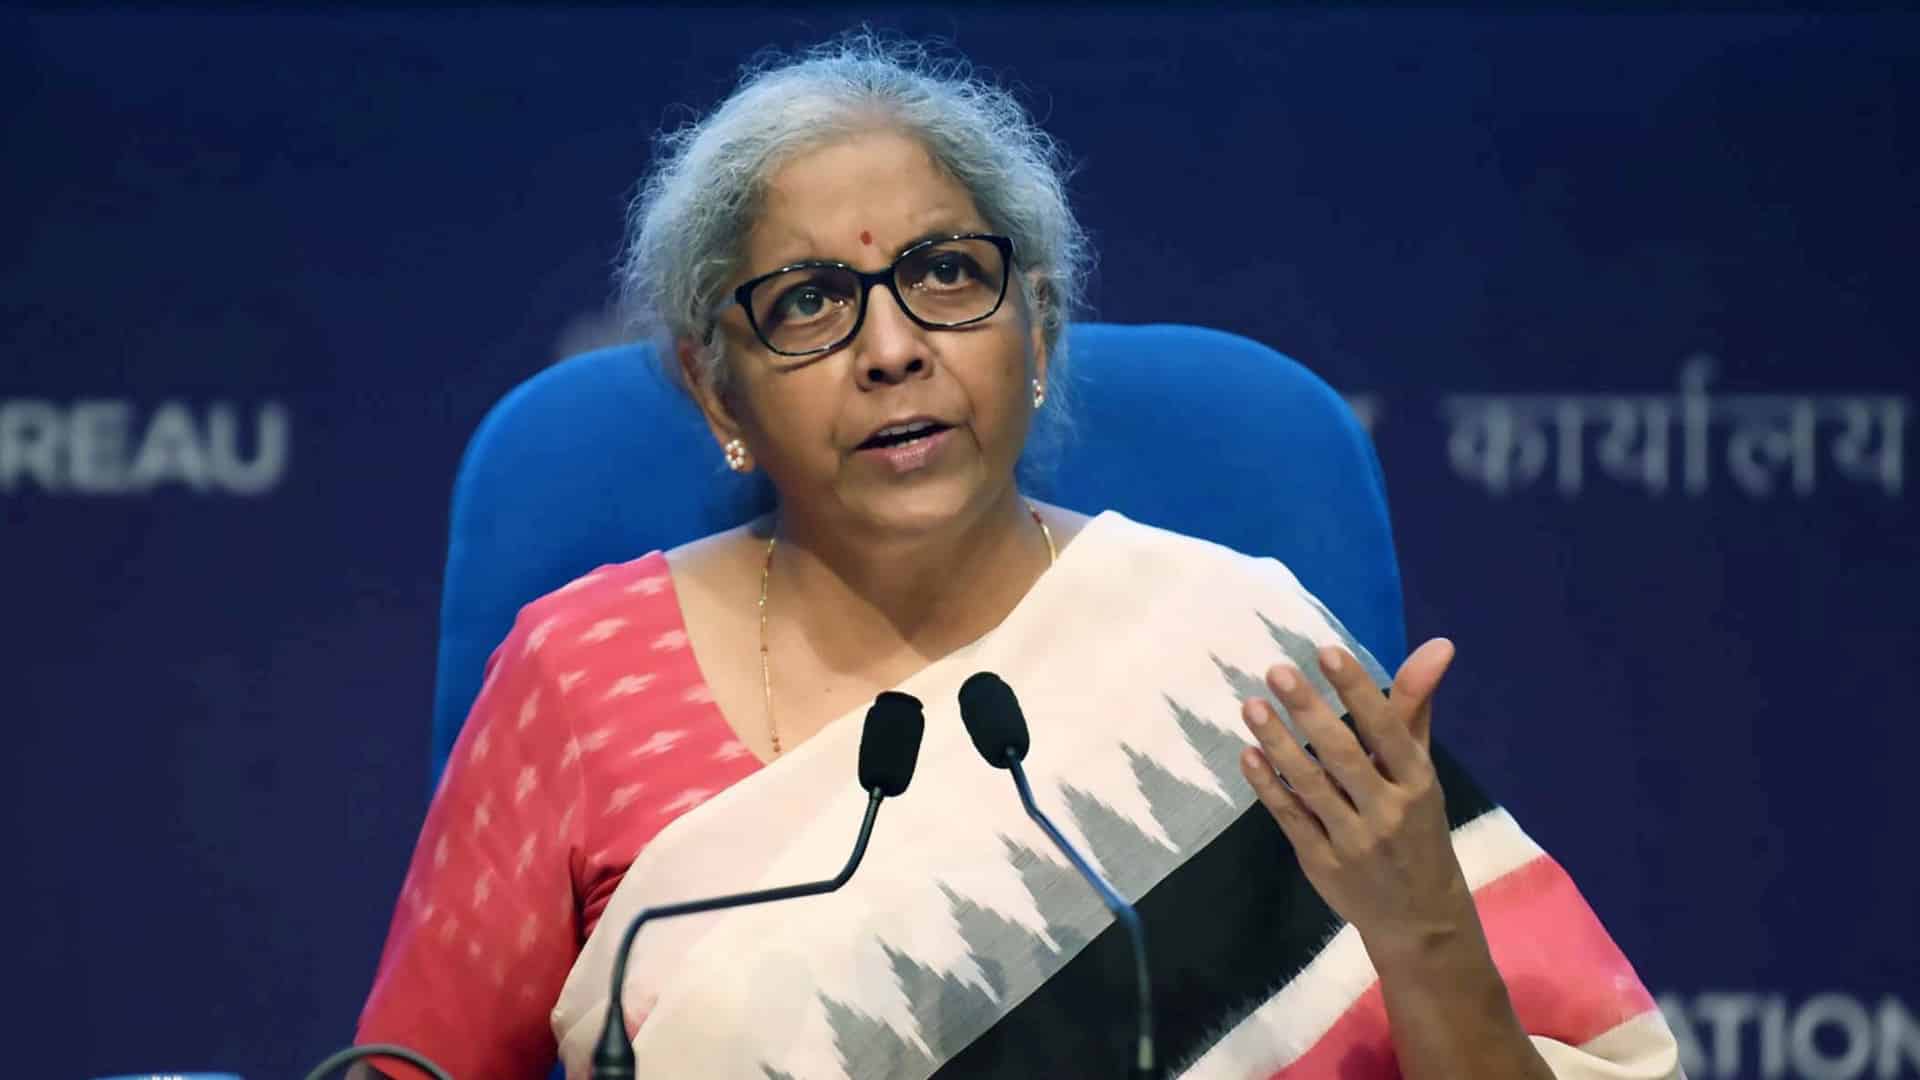 RBI wants govt to prohibit cryptocurrencies: Sitharaman